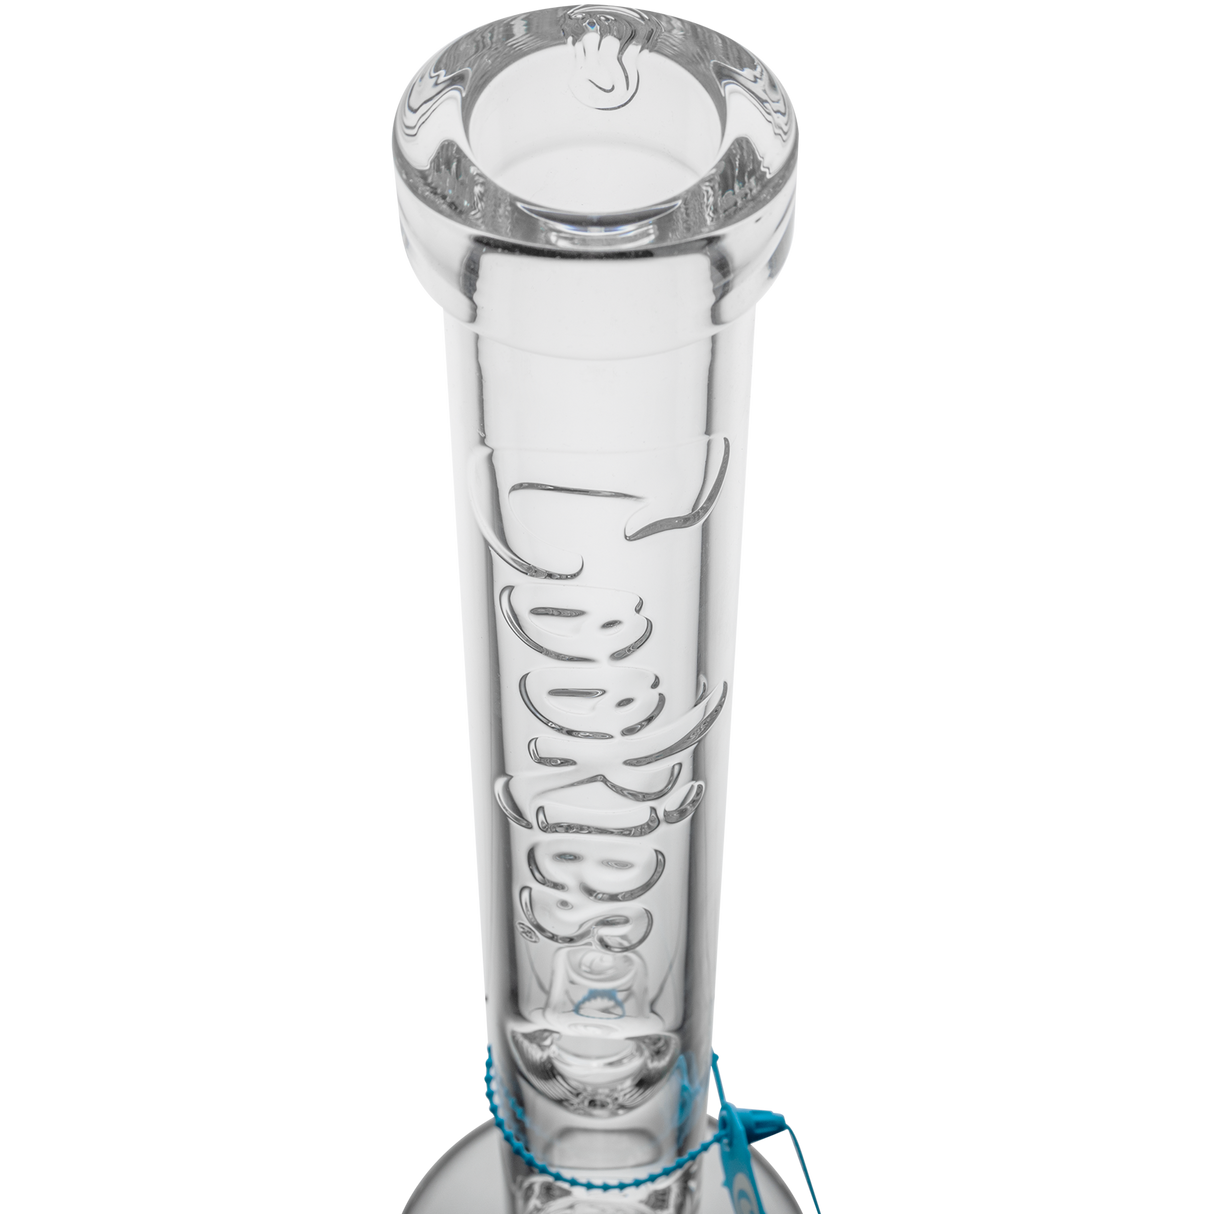 Cookies Flame Straight Bong in 7mm Thick Borosilicate Glass with Heavy Wall Design